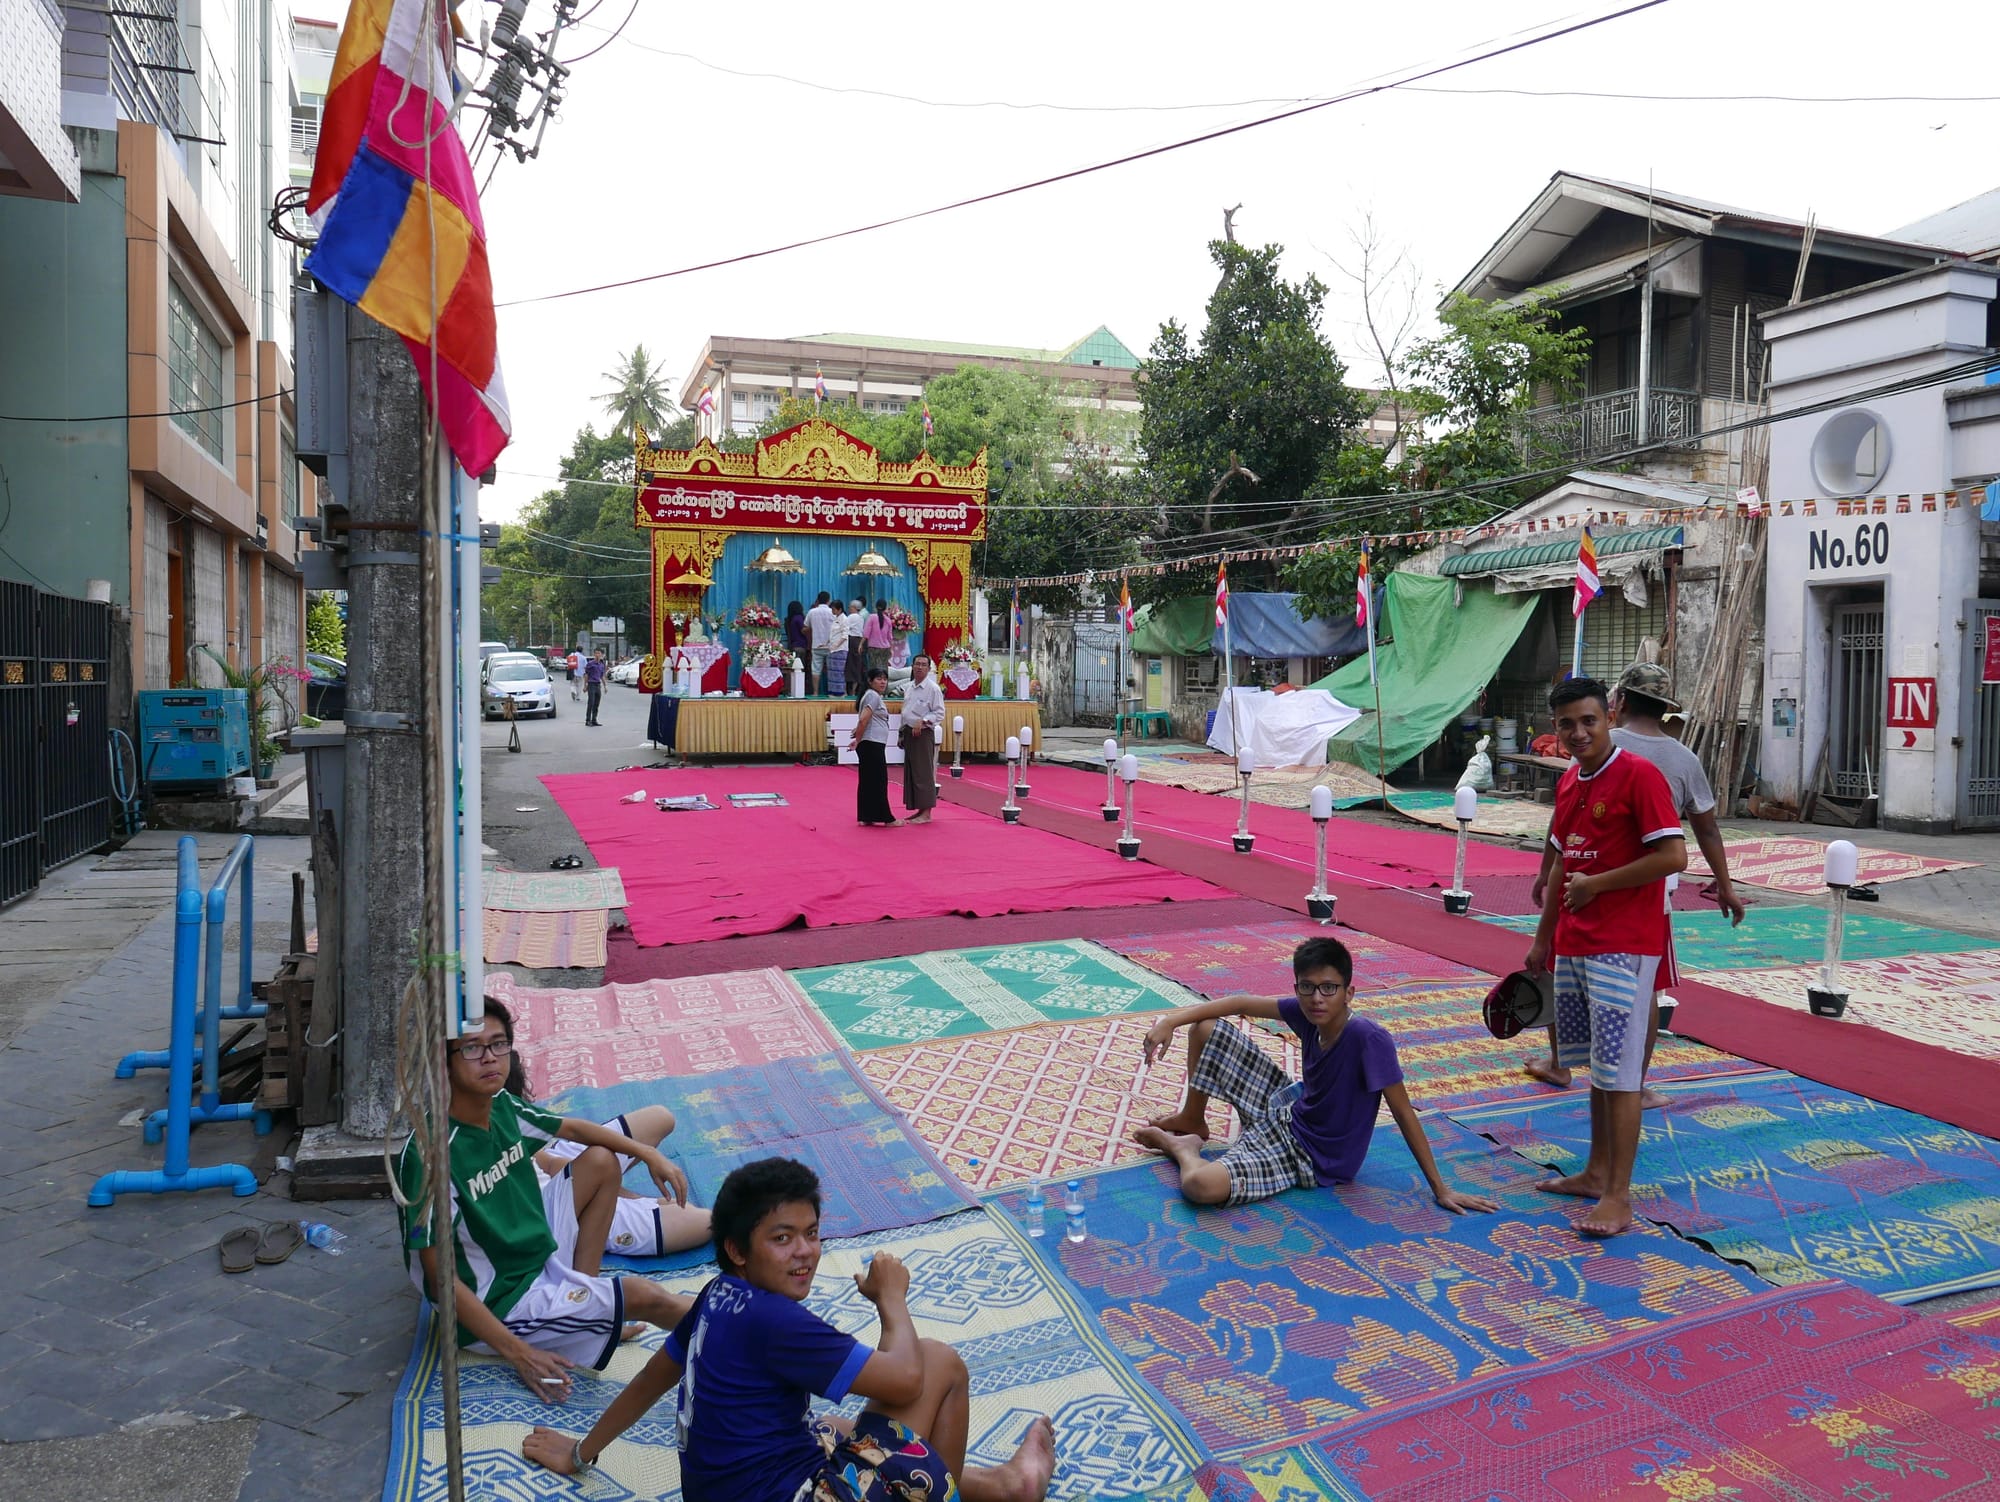 Photo by Author — Carpeting a street in Yangon